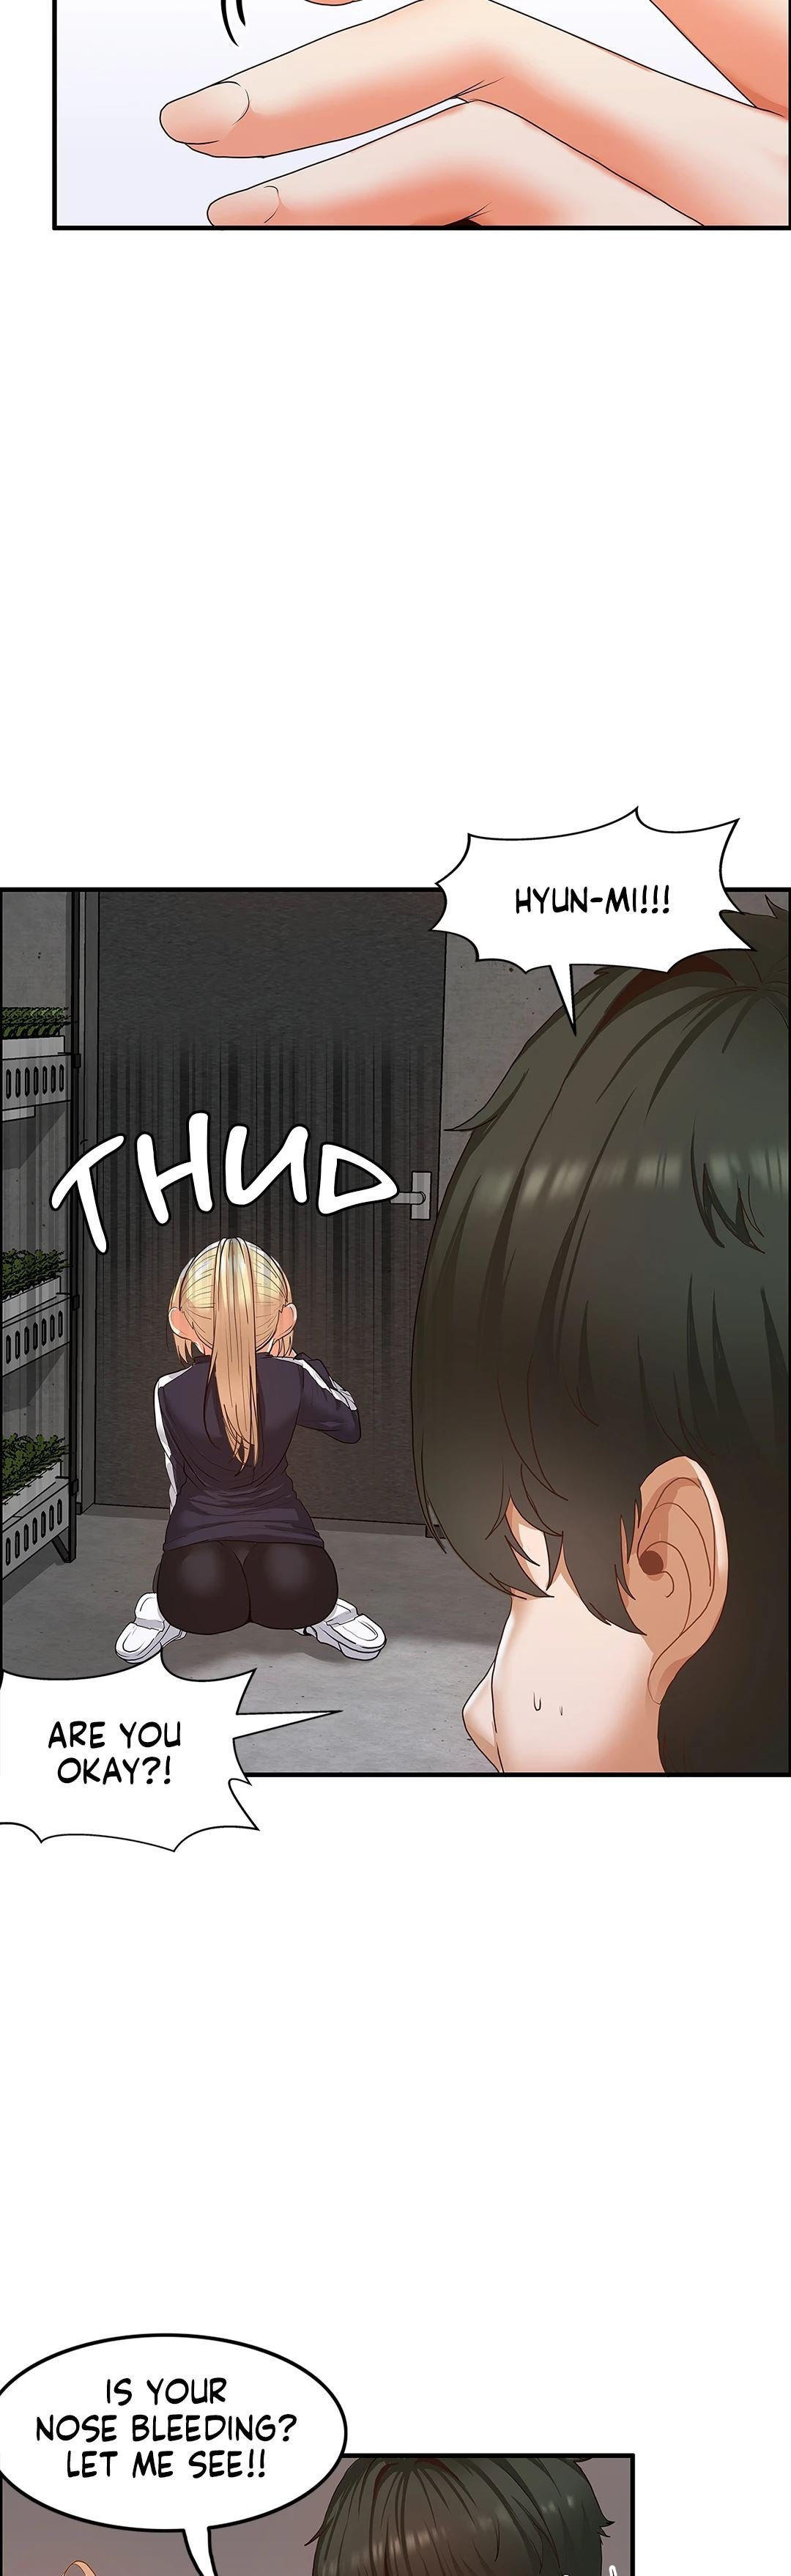 the-two-eves-the-girl-trapped-in-the-wall-chap-4-6